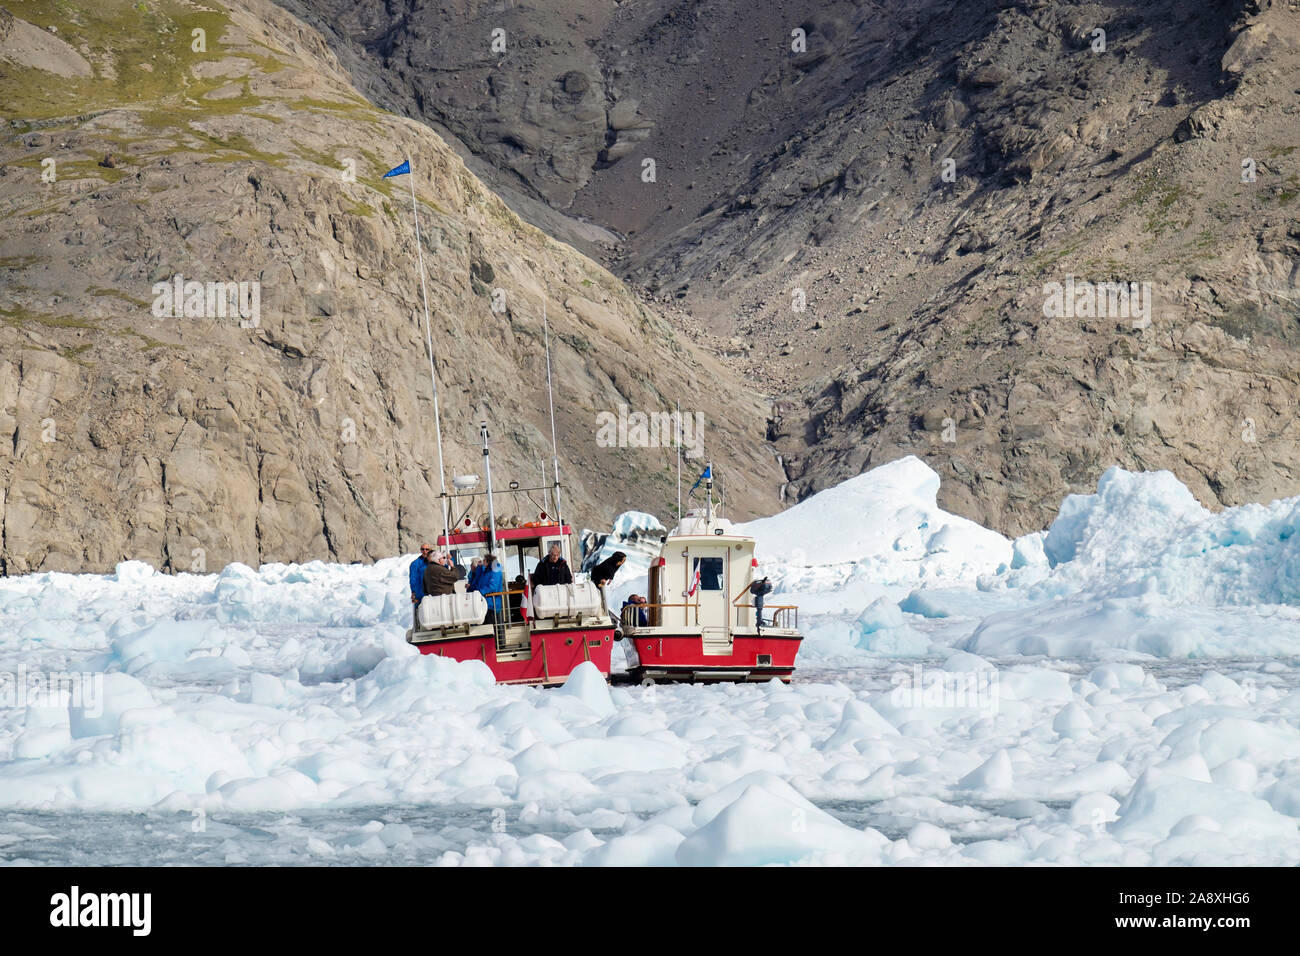 Tourists on icefjord cruise boats surrounded by ice from Qorqup Sermia glacier in Qooroq fjord in summer. Narsarsuaq, Kujalleq, Southern Greenland Stock Photo